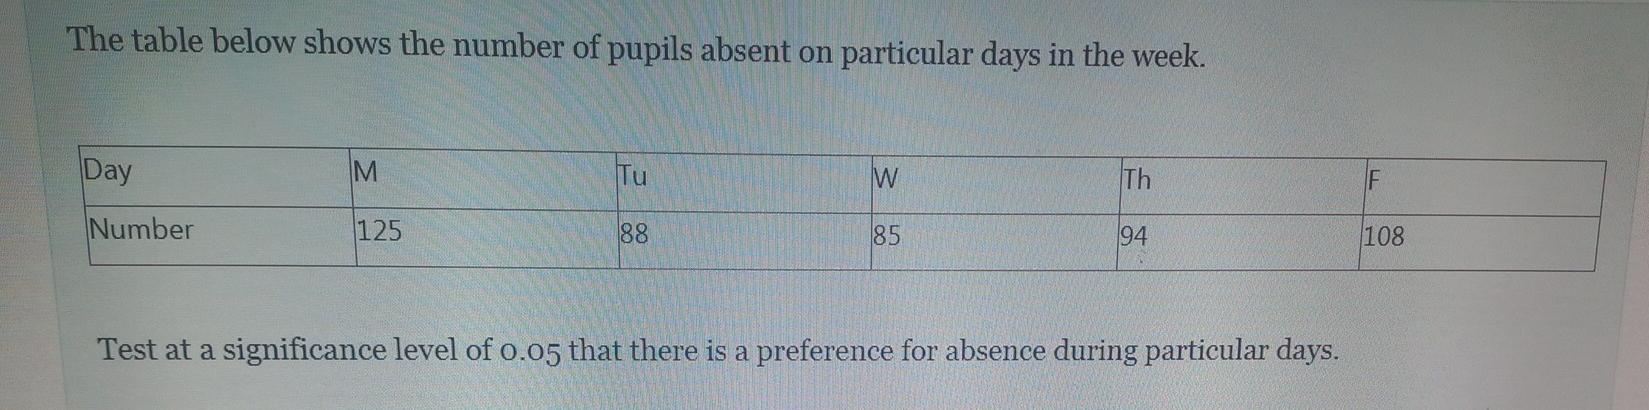 The Table Below Shows The Number Of Pupils Absent On Particular Days In The Week Day M Tu W Th If Number 125 88 85 94 1 1